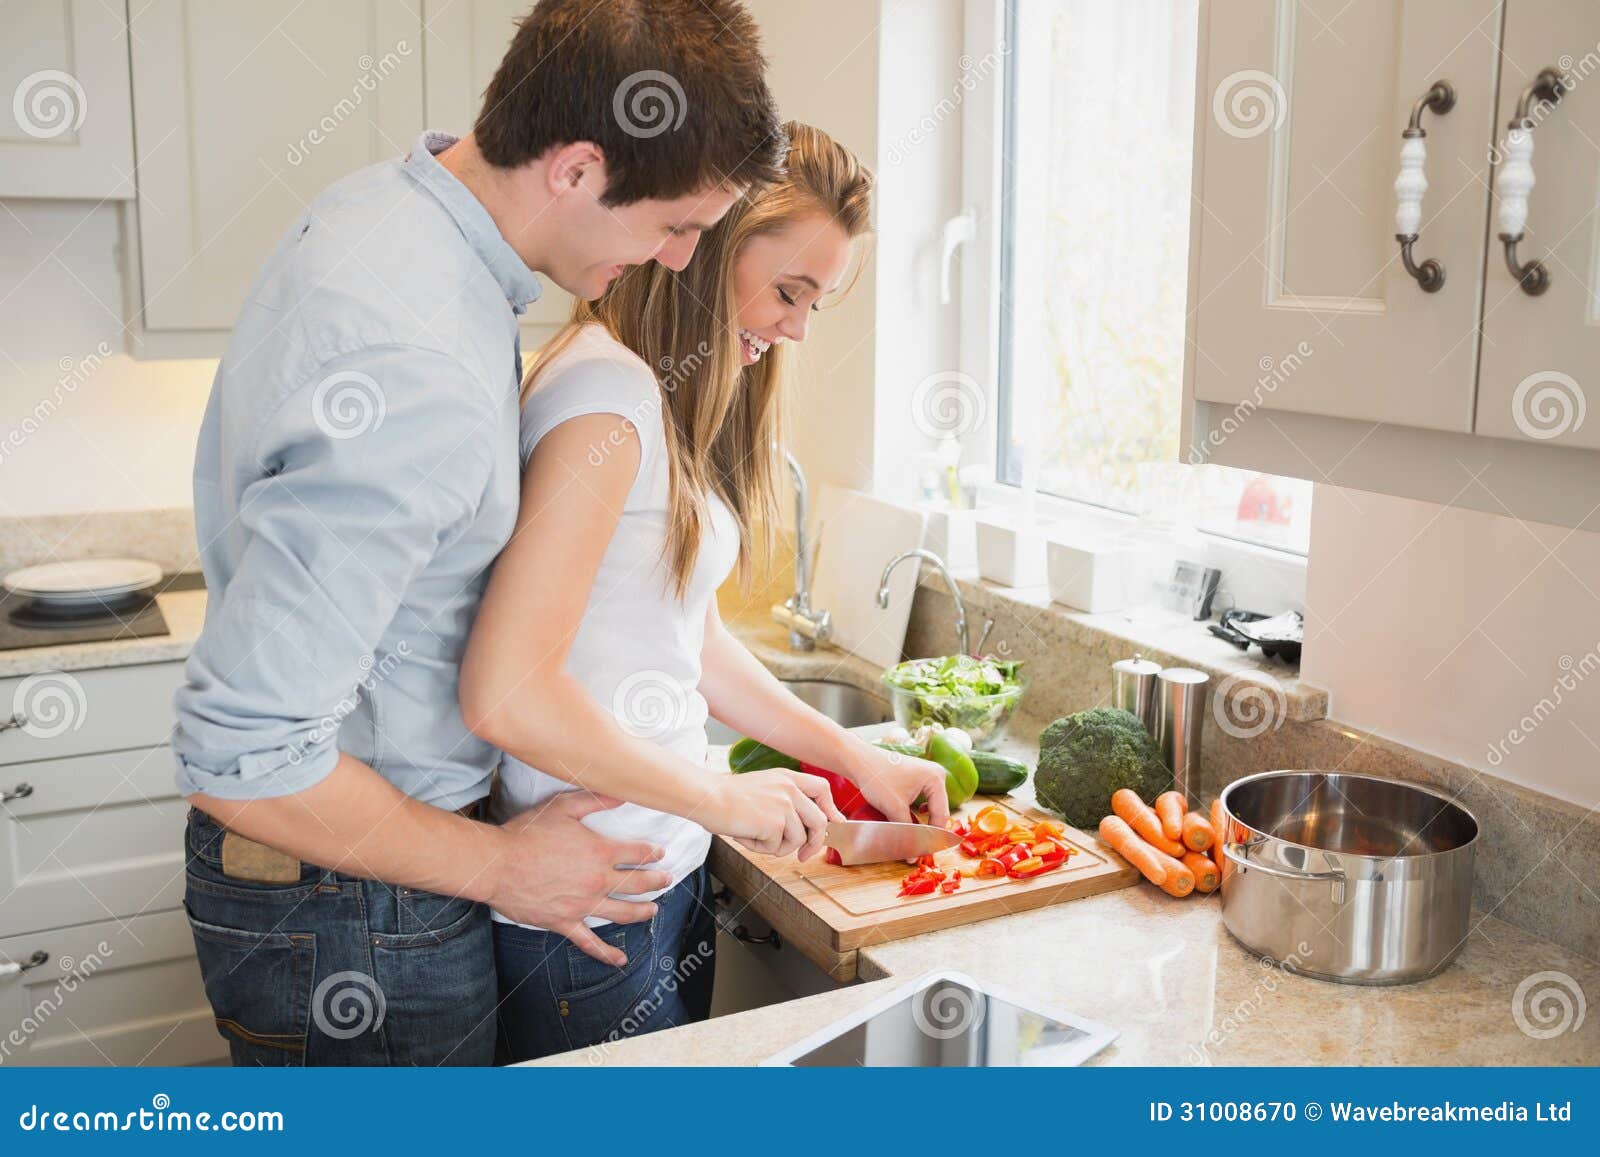 Man Talking with Woman while Cooking Stock Photo